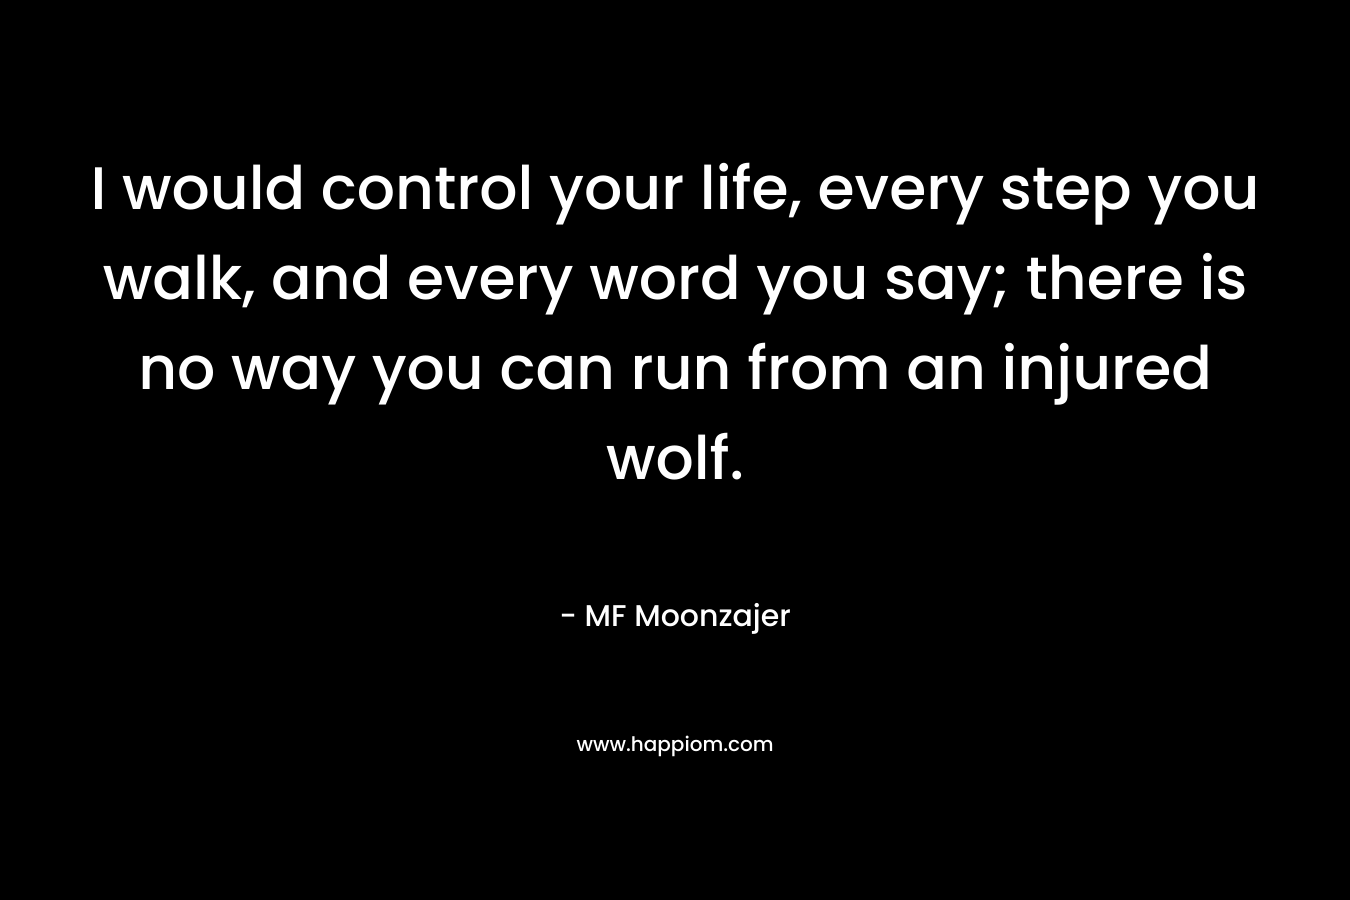 I would control your life, every step you walk, and every word you say; there is no way you can run from an injured wolf. – MF Moonzajer